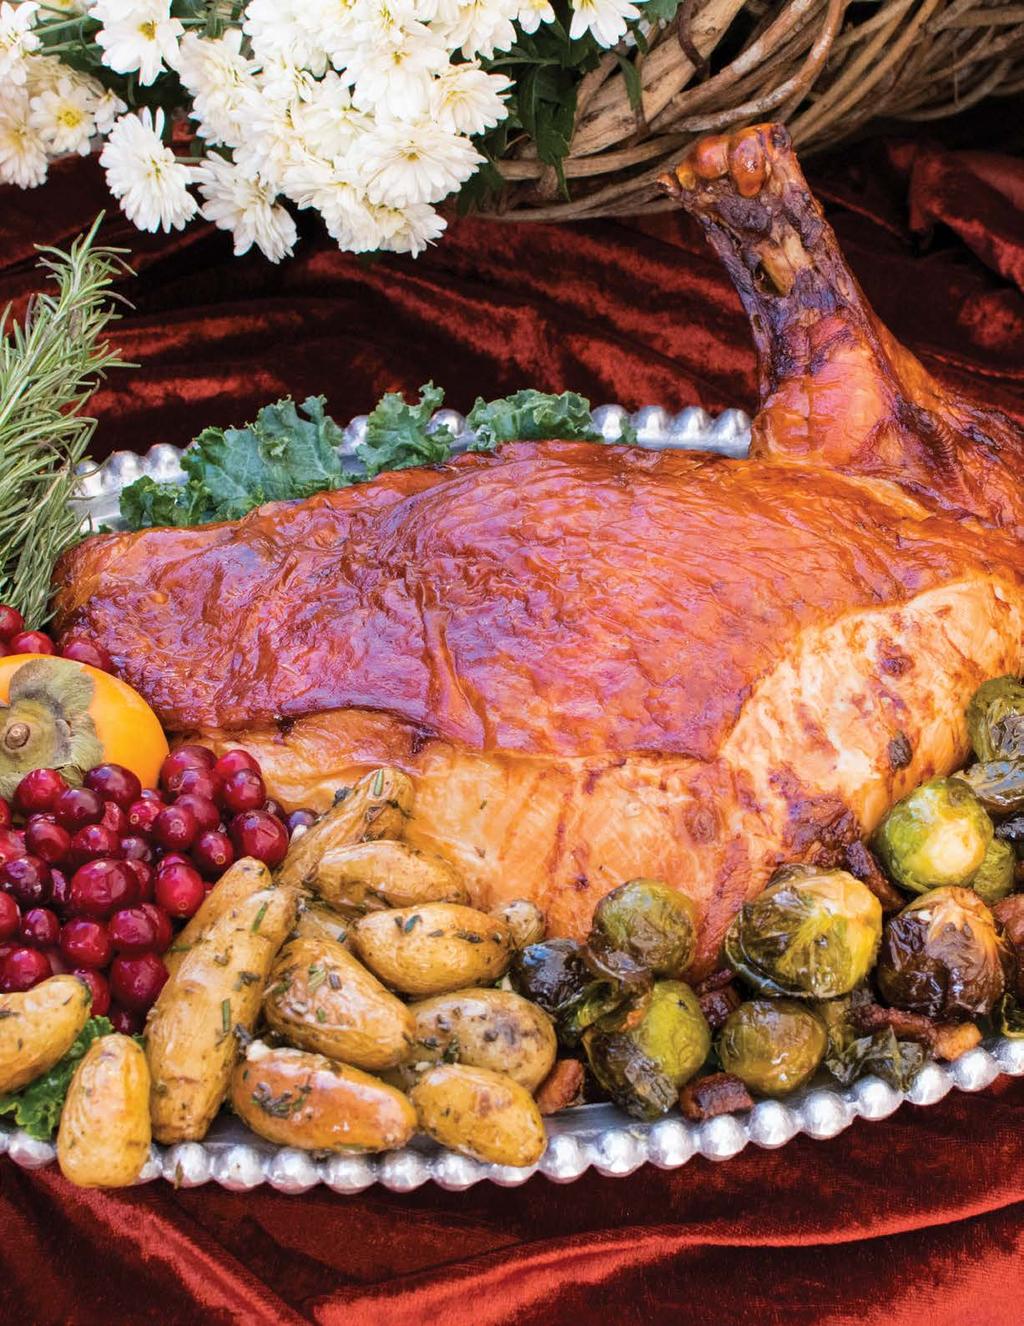 CATERING MENU STARCHES SMALL (serves 1 2) MEDIUM (serves 4 6) LARGE (serves 10 15) Traditional Stuffing with Onions, Celery & Herbs $6 $18 $42 Apple, Sausage & Brioche Stuffing with Dried Cranberries